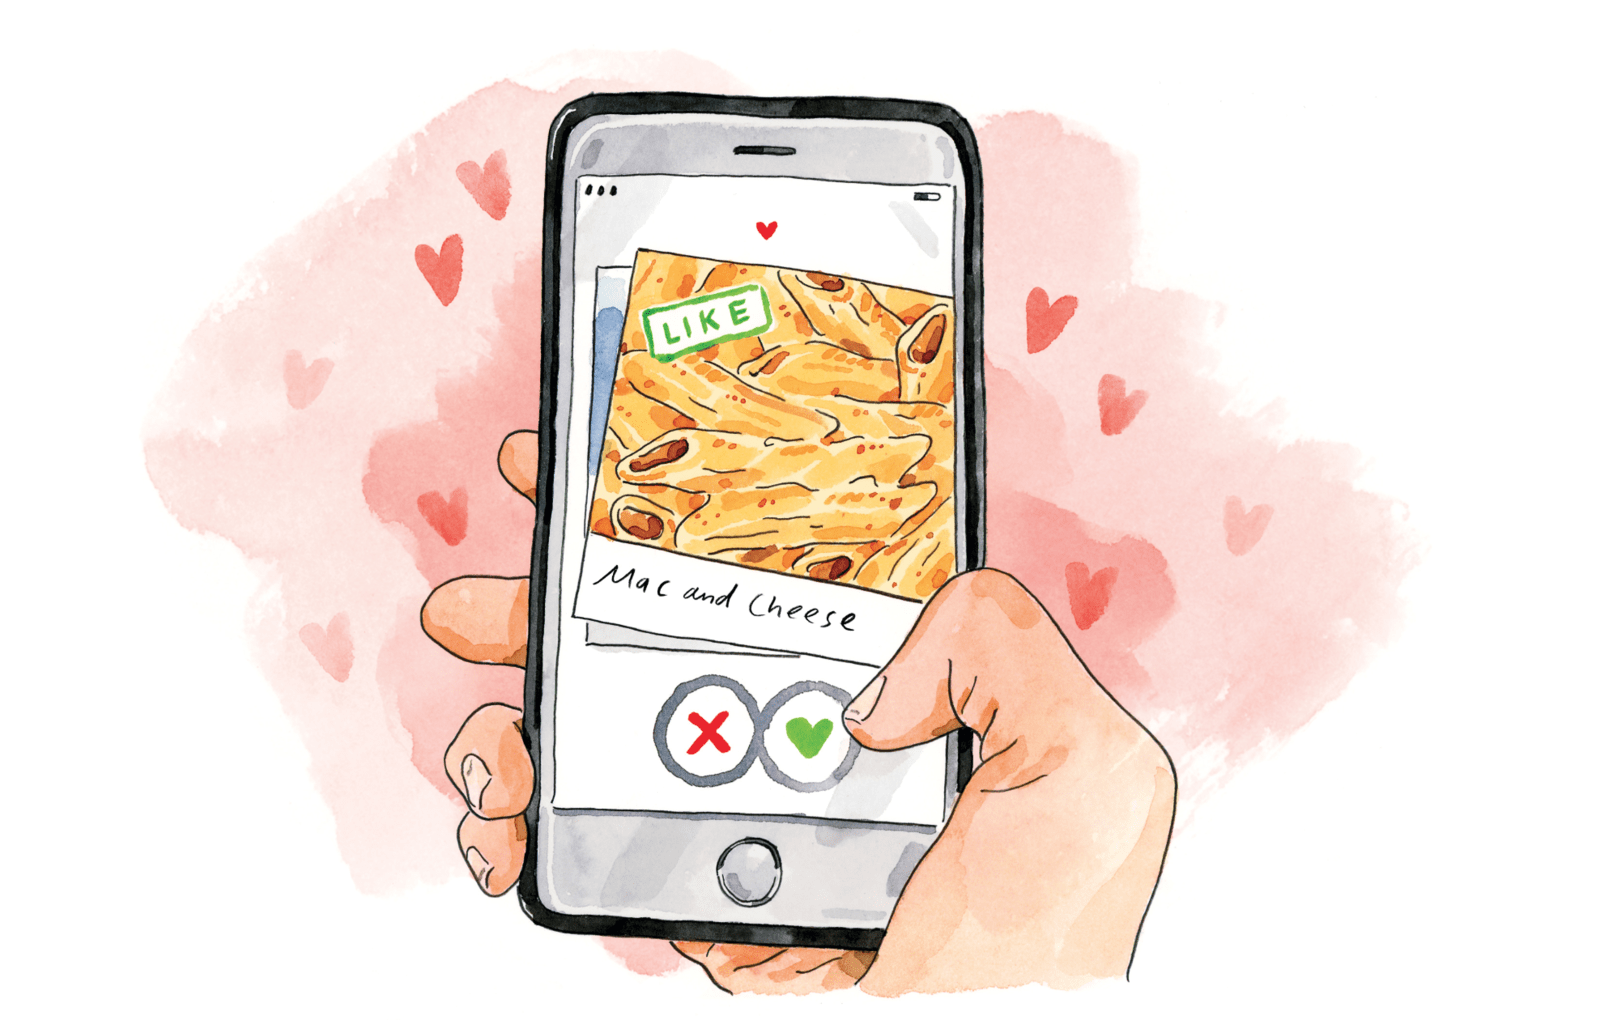 illustration of a phone screen showing a tinder profile for mac and cheese | Culture: The Word on Cheese - Mac n Cheese Saves a Tinder Date